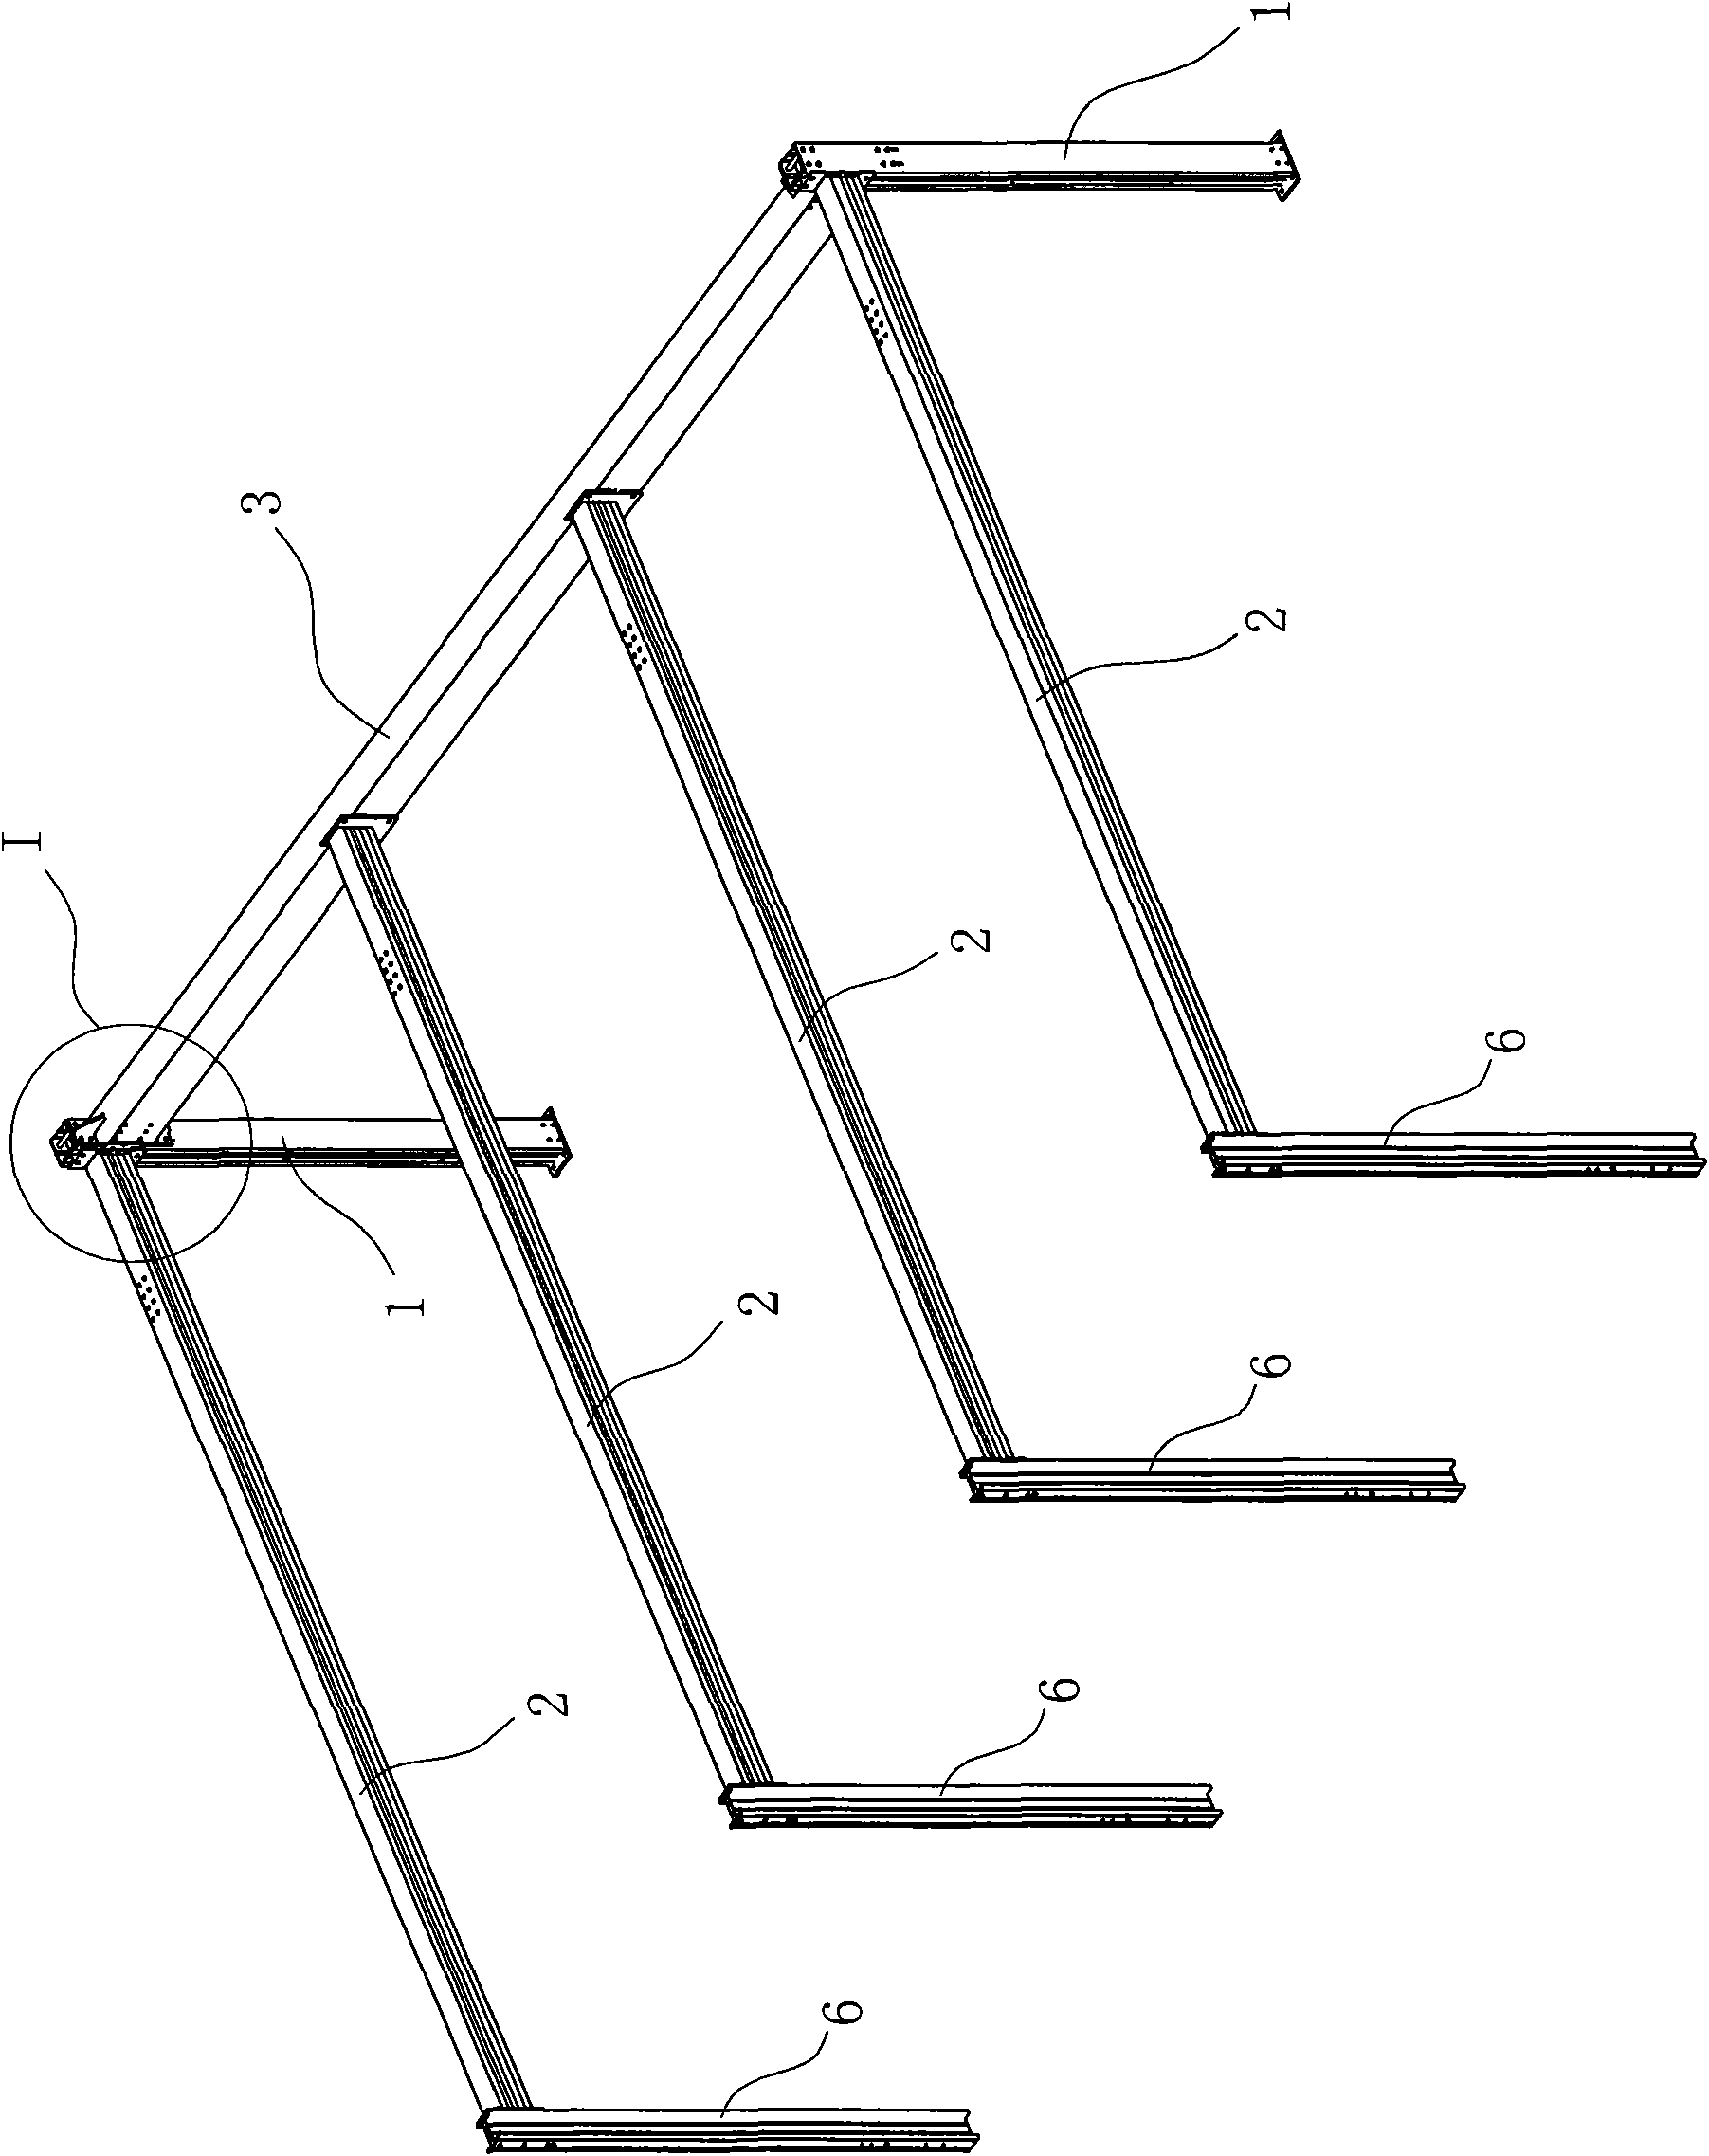 Connecting structure for nested composite sections